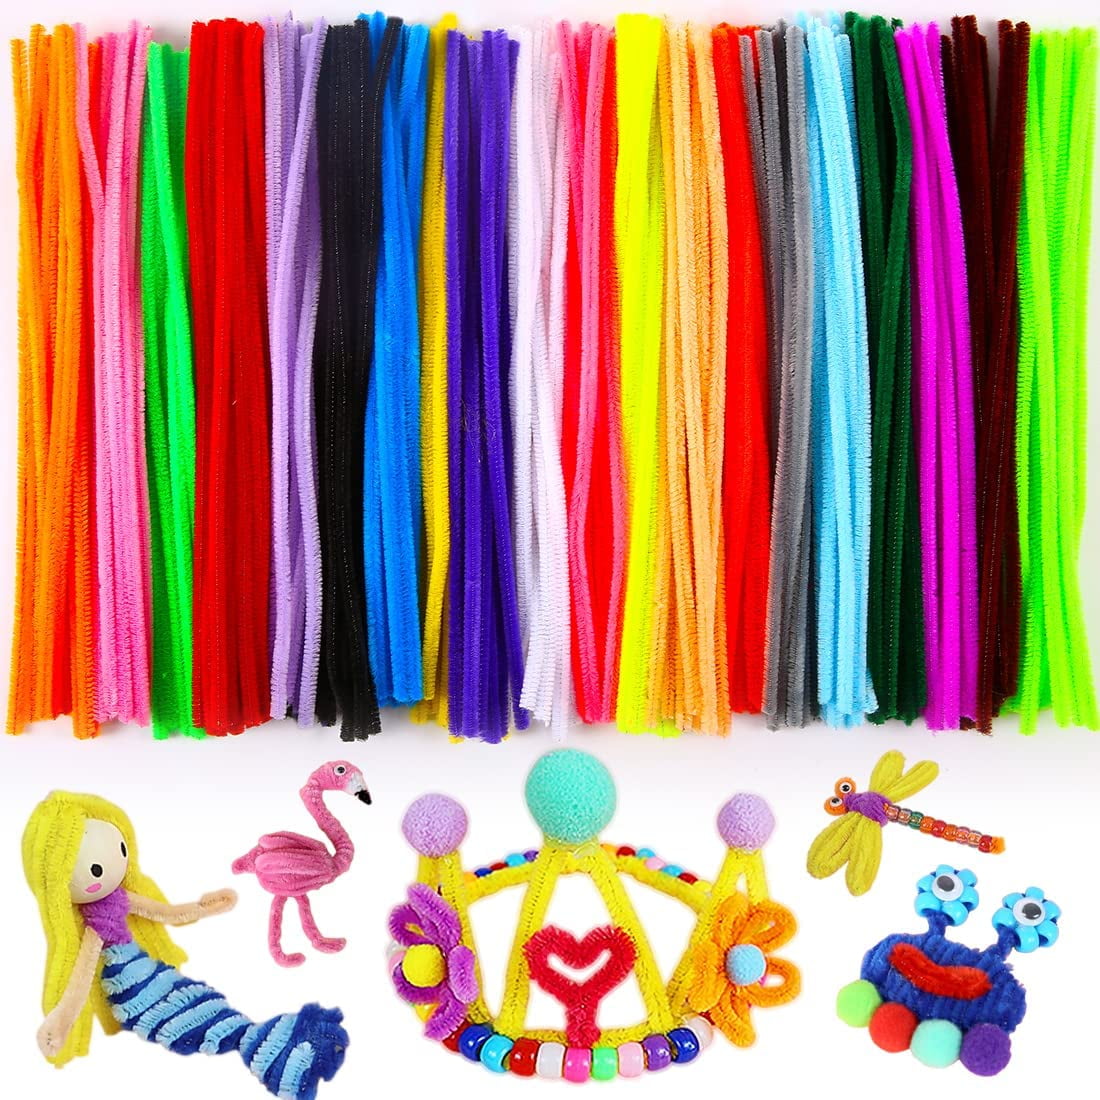 Fong Pipe Cleaners, Pipe Cleaners Craft, Arts And Crafts For Kids, Crafts,  Craft Supplies, Art Supplies (200 Multi-co Z